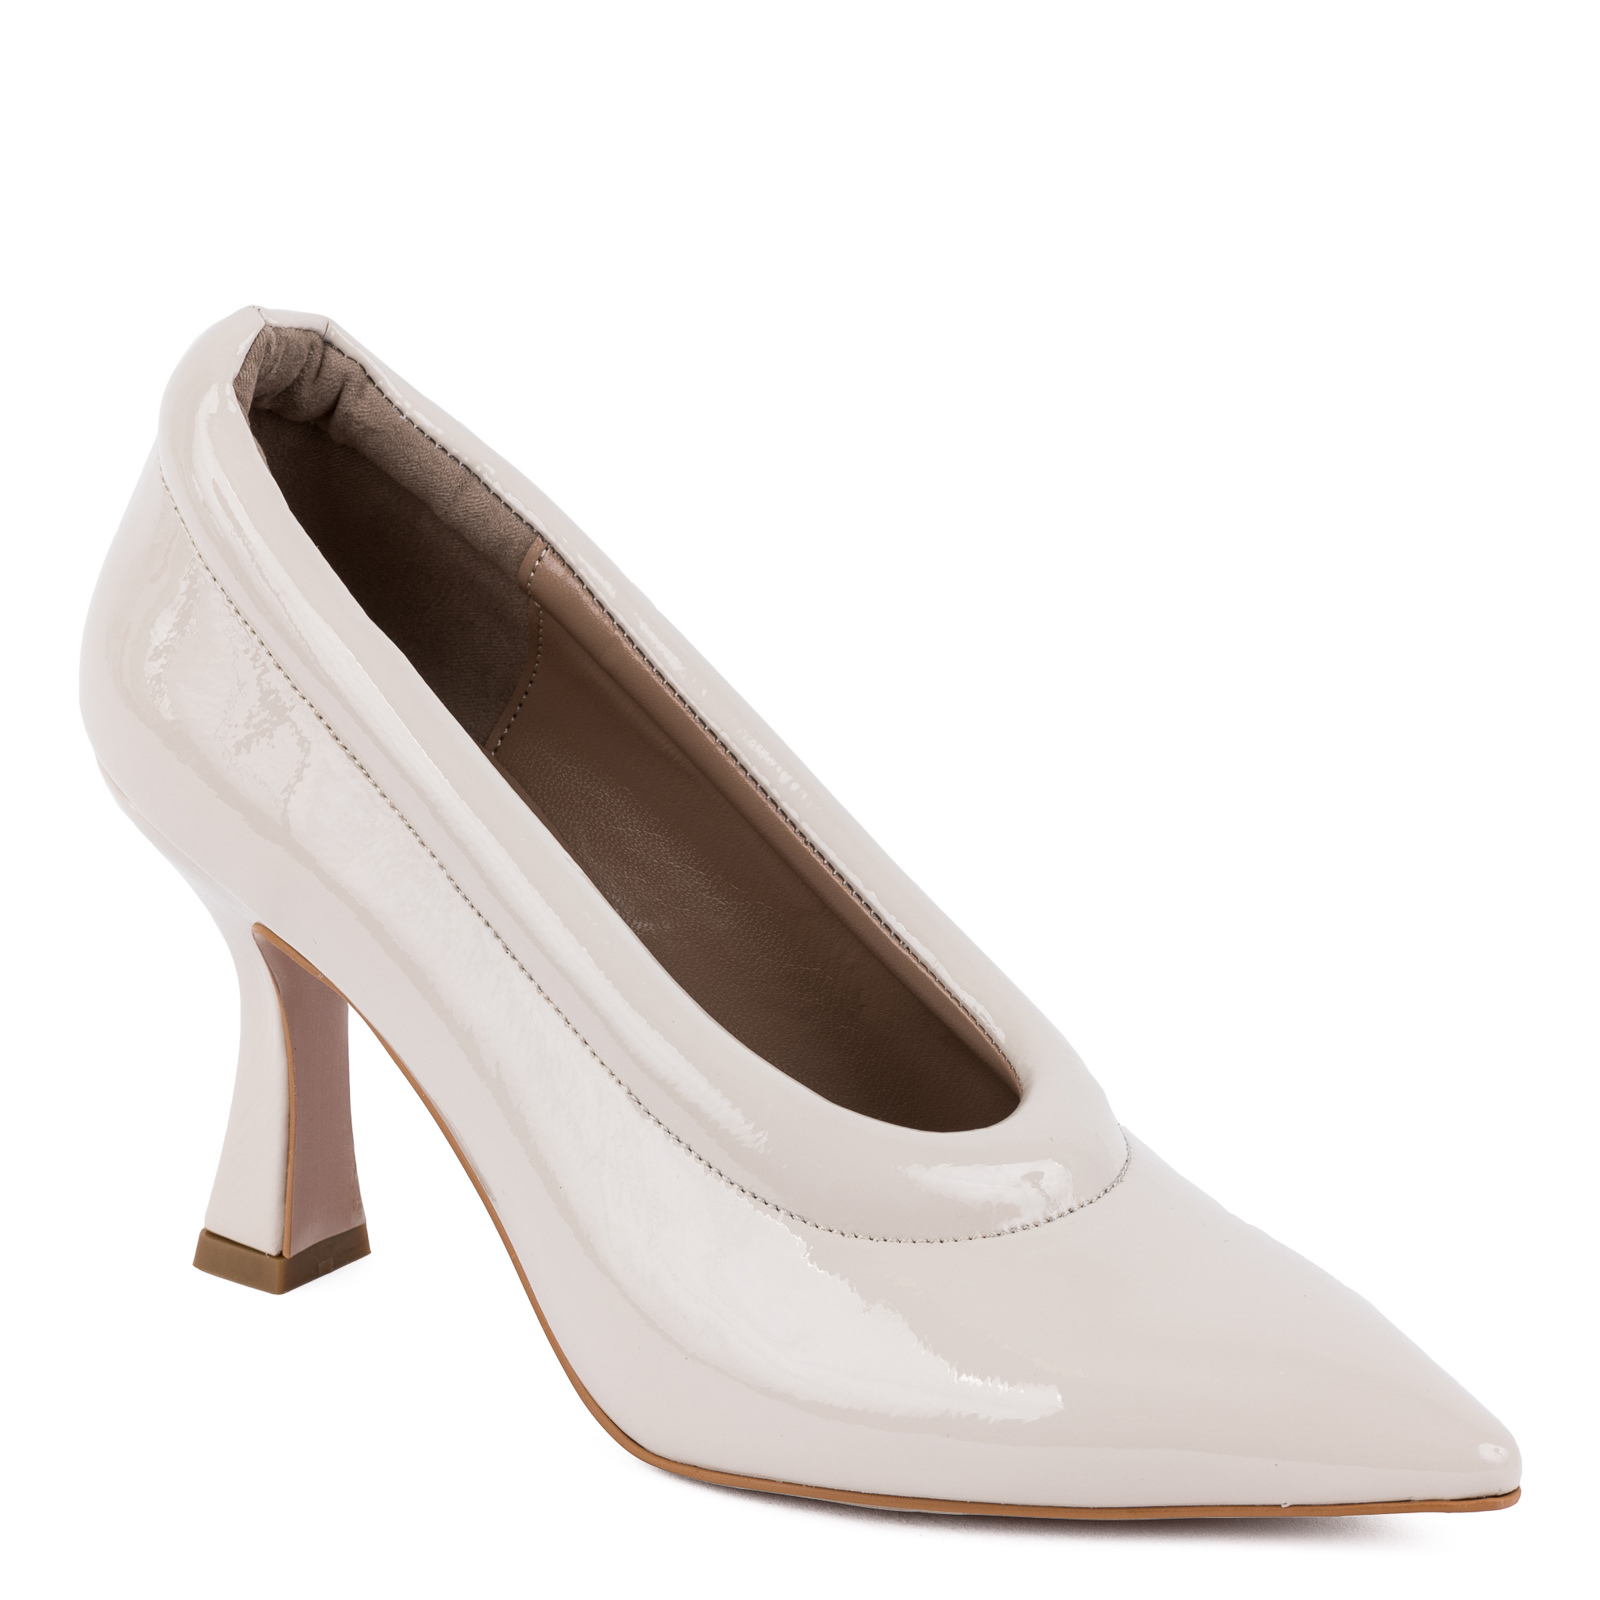 PATENT POINTED STILLETO SHOES WITH THIN HEEL - BEIGE